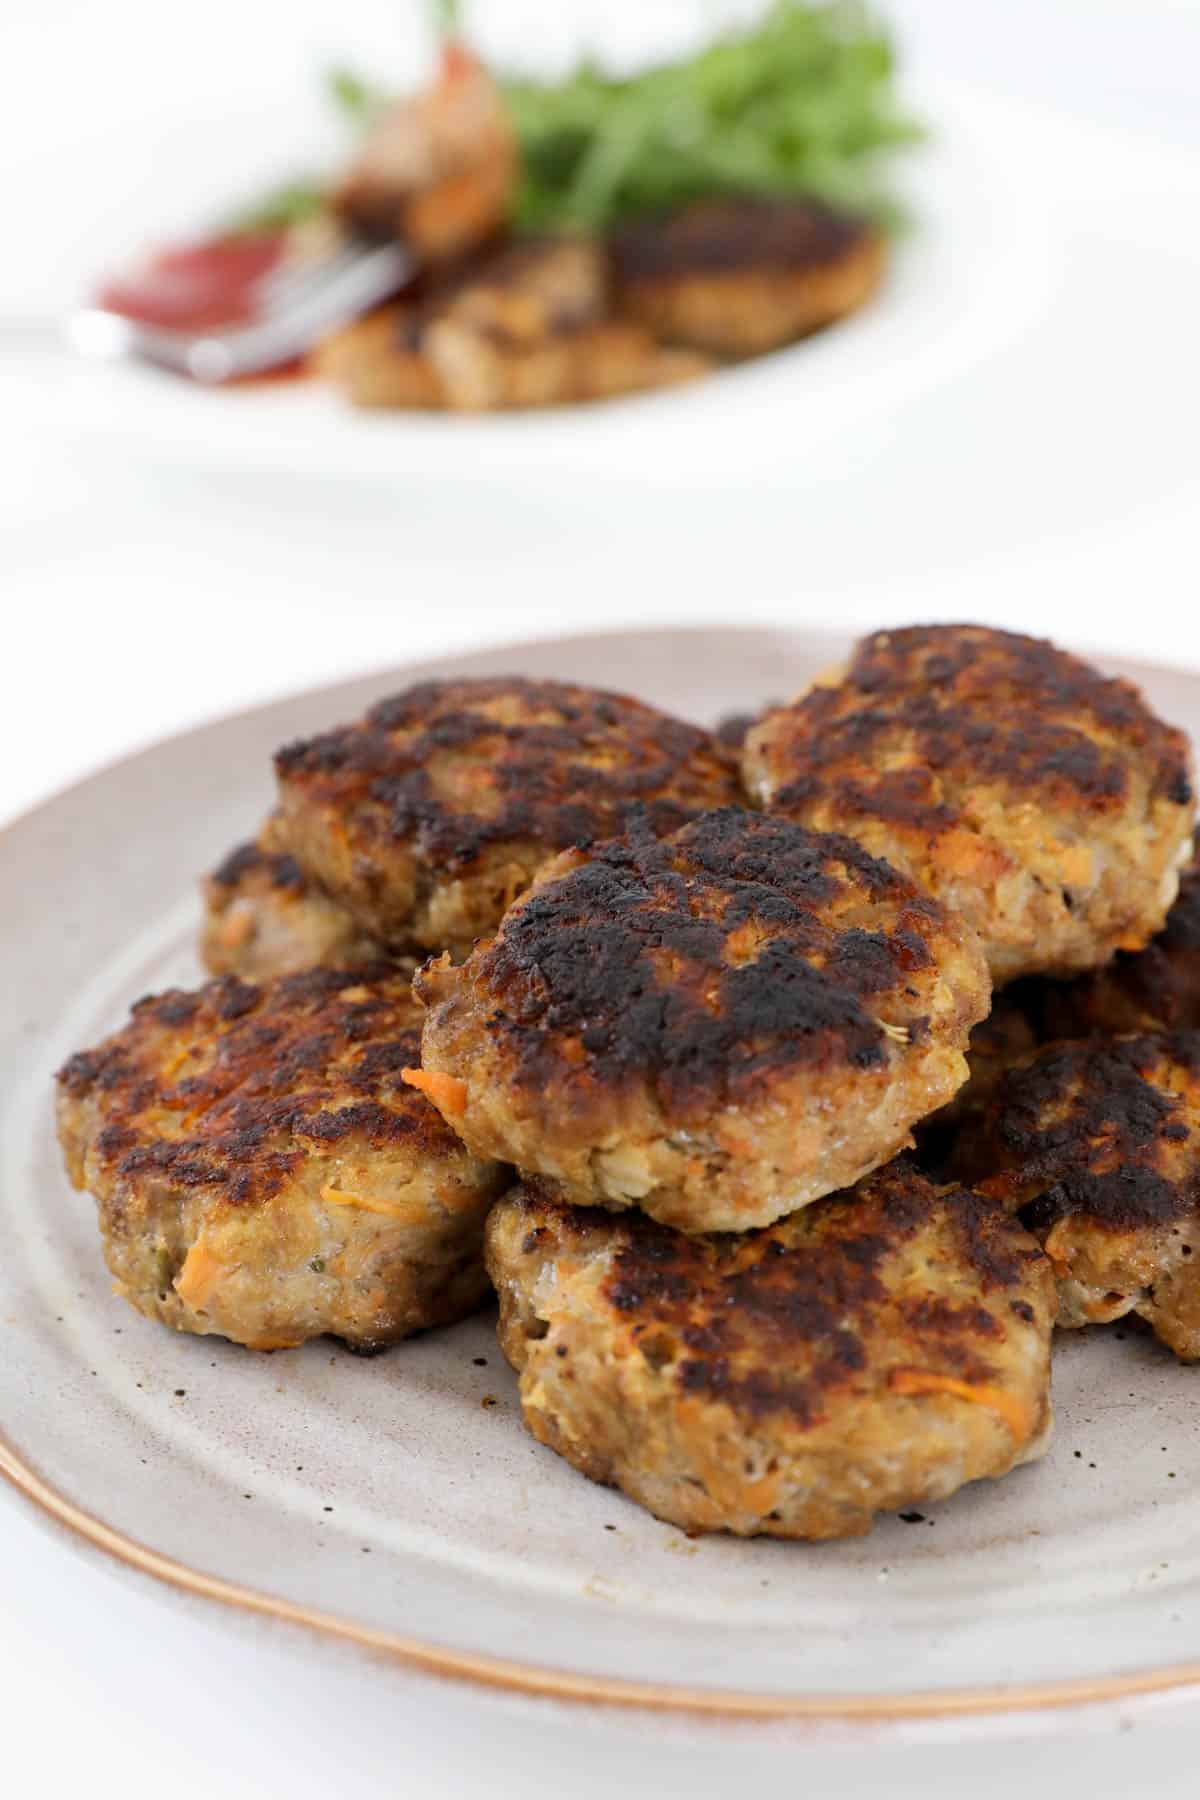 A pile of cooked rissoles on a plate.